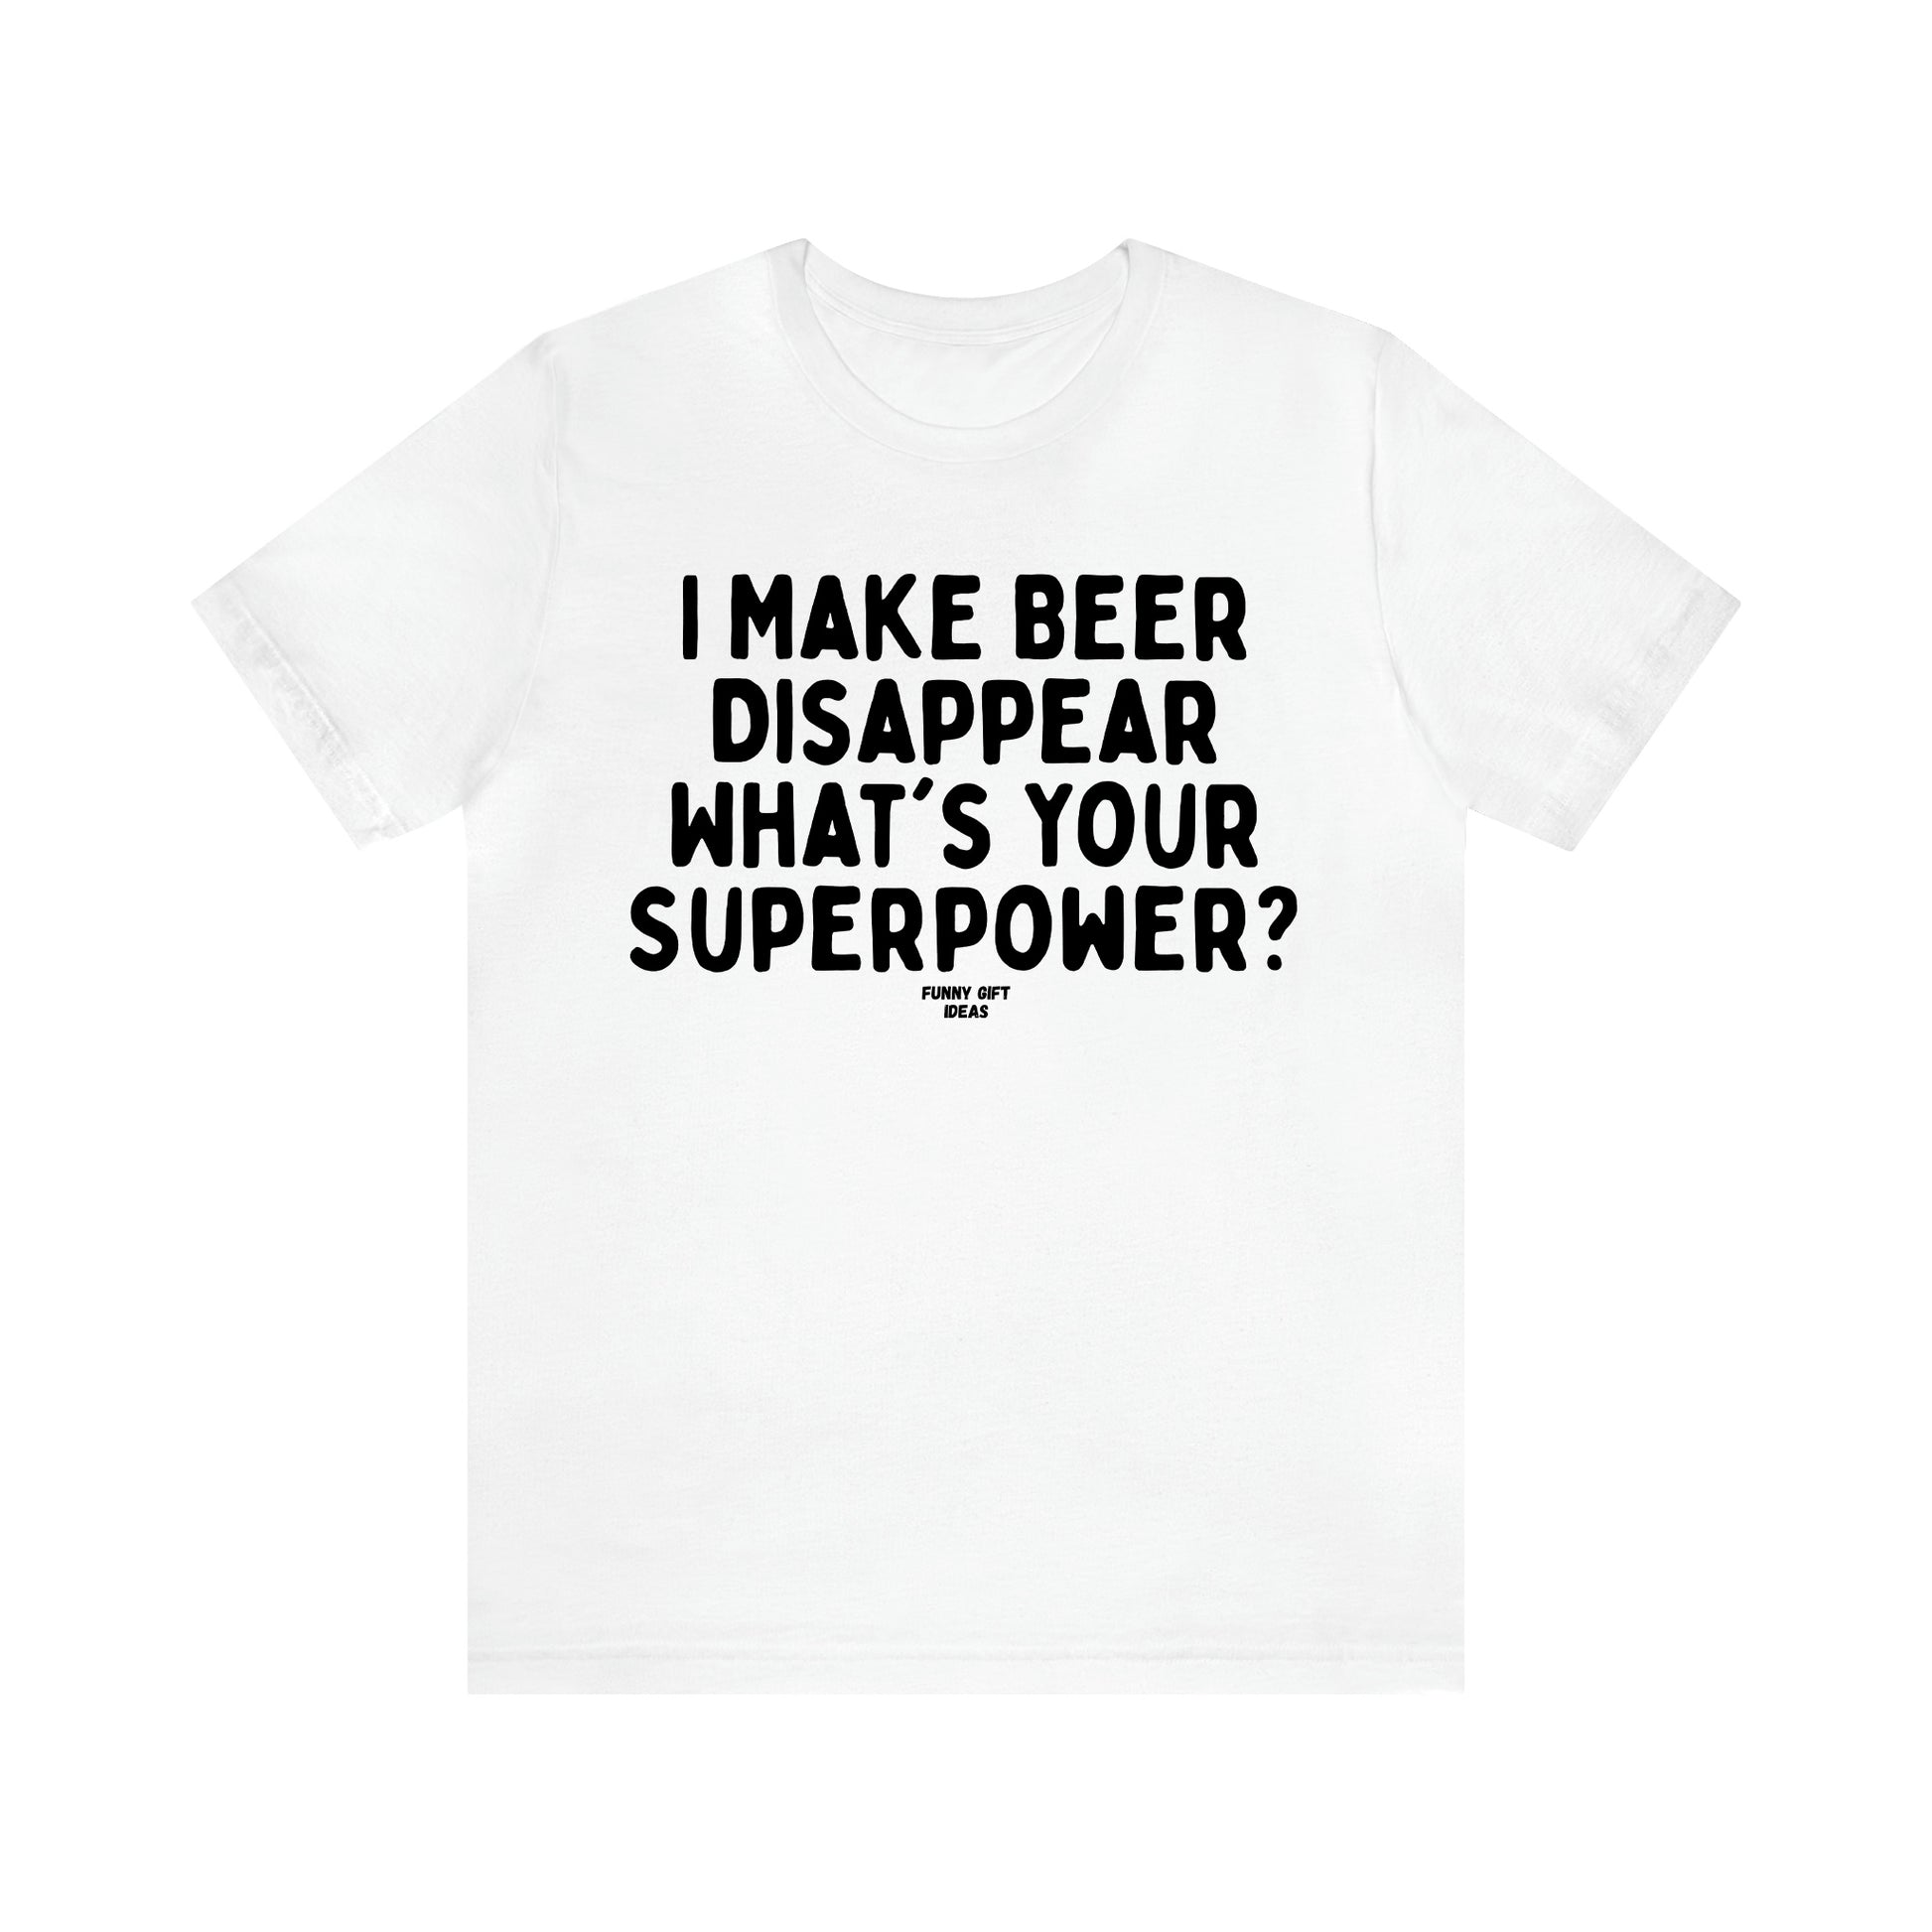 Women's T Shirts I Make Beer Disappear What's Your Superpower? - Funny Gift Ideas